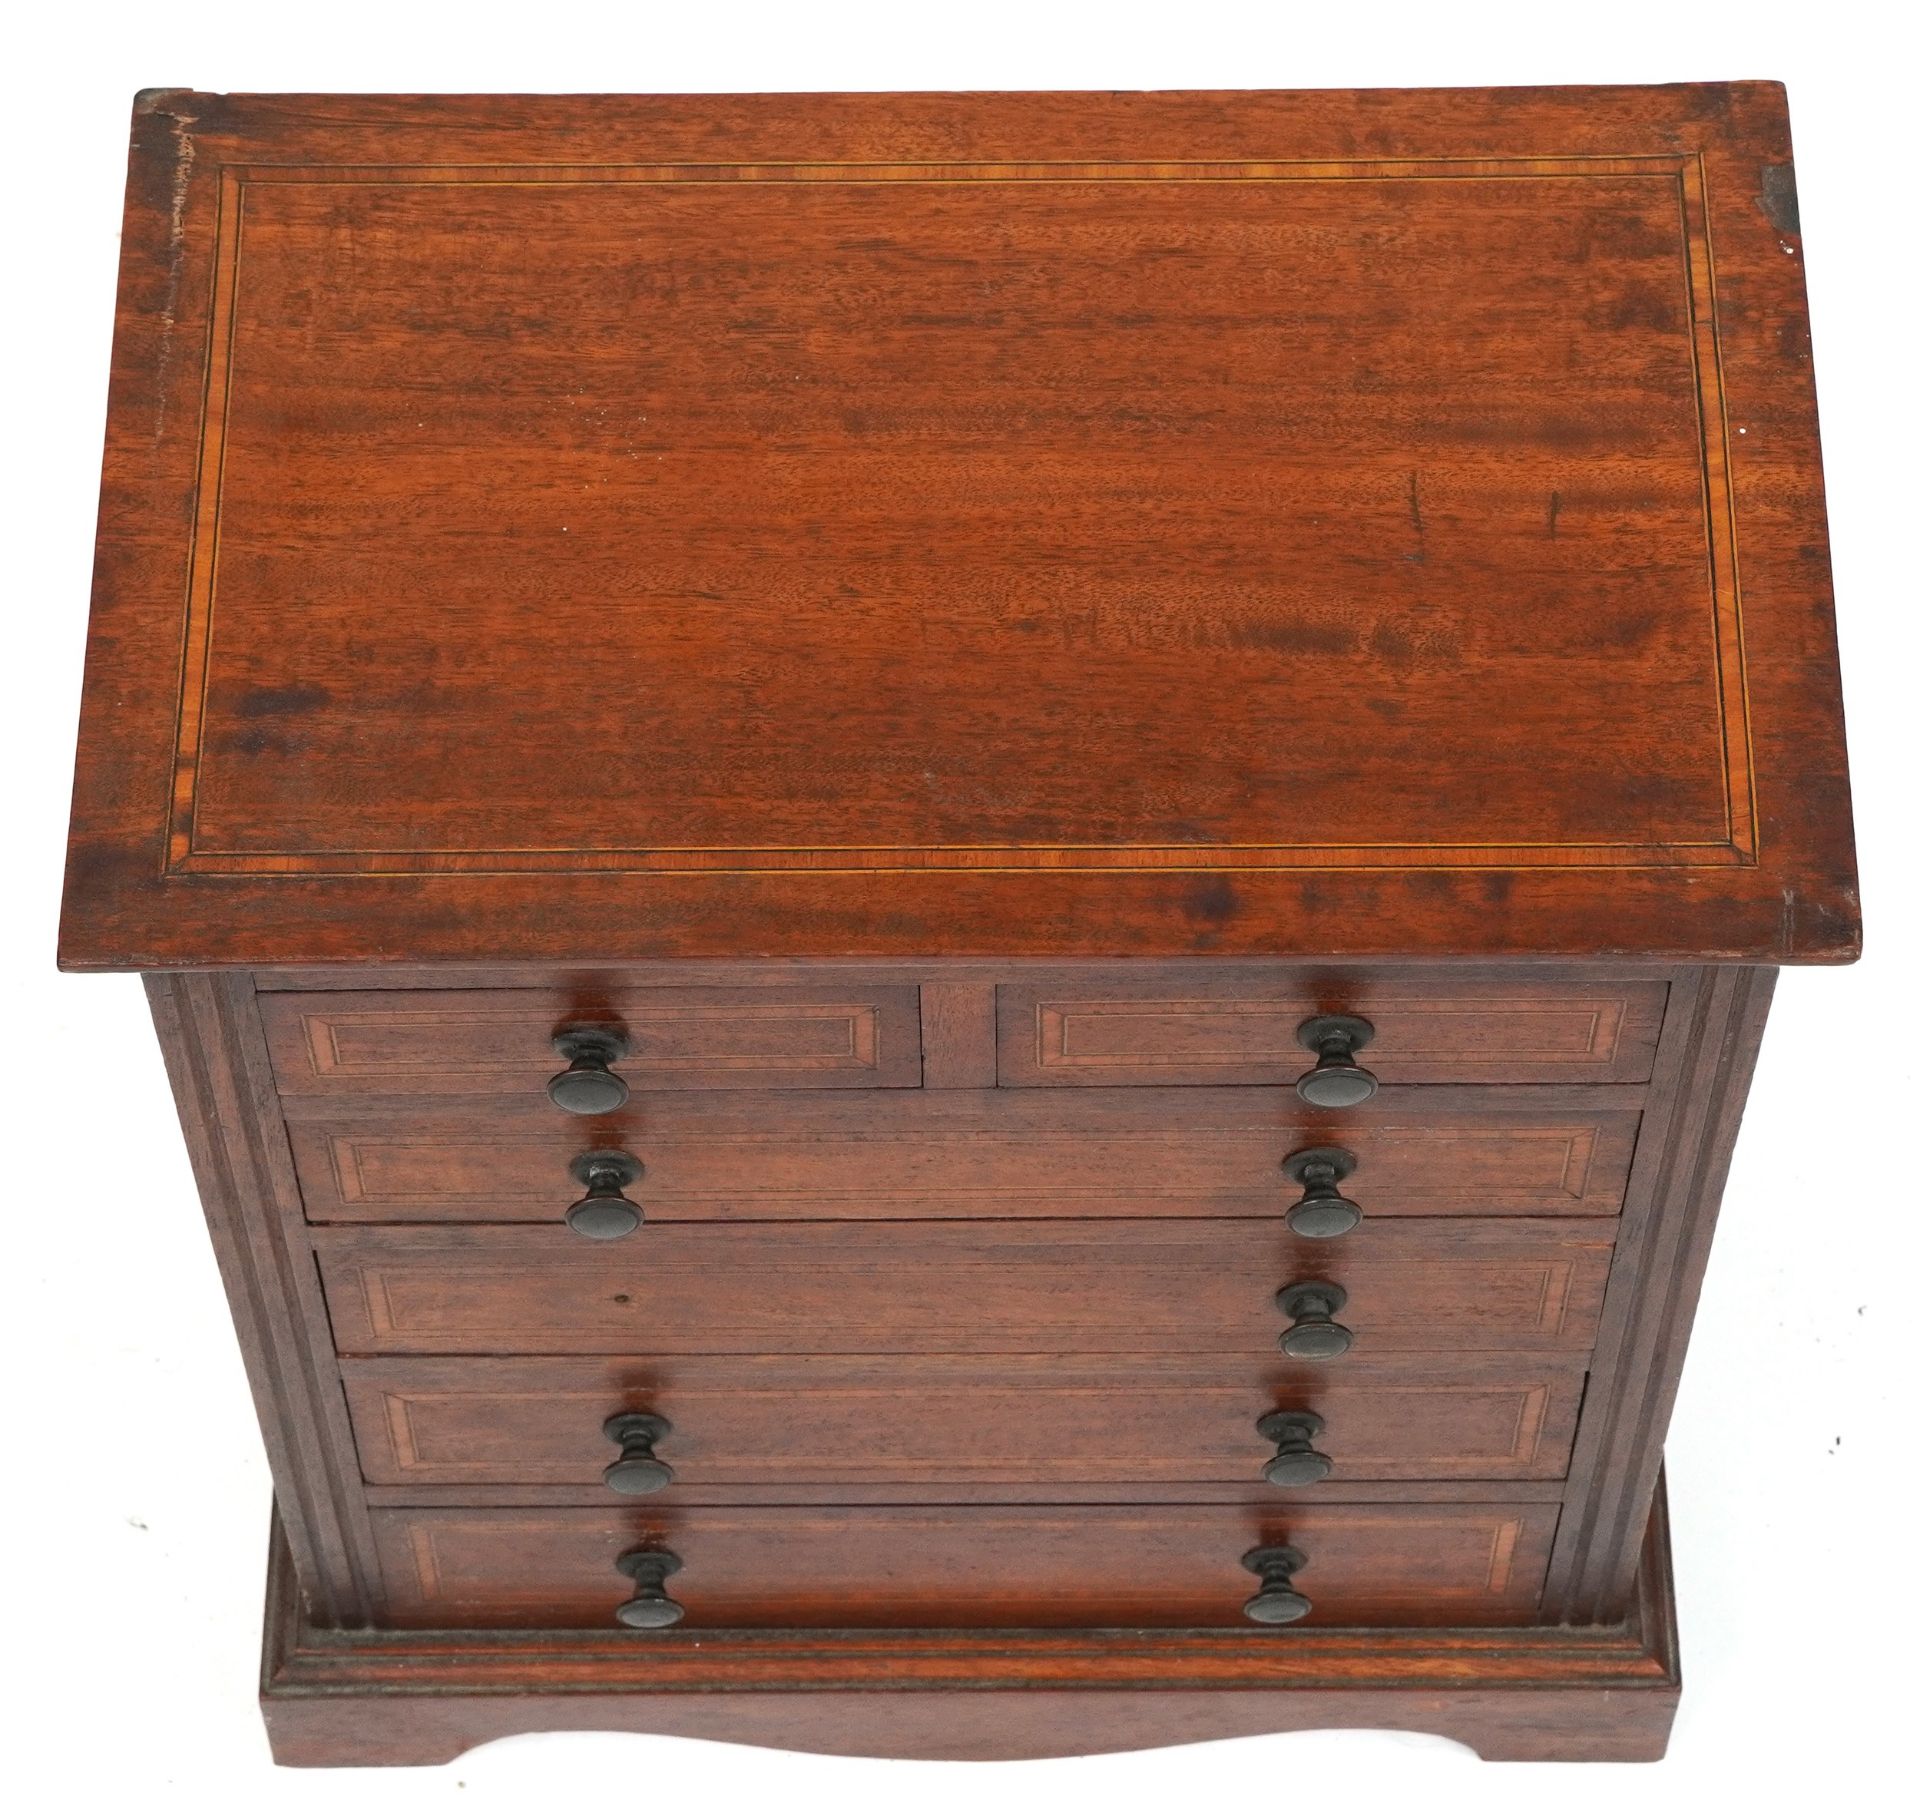 Early 20th century inlaid mahogany apprentice chest fitted with an arrangement of six drawers, - Image 3 of 4